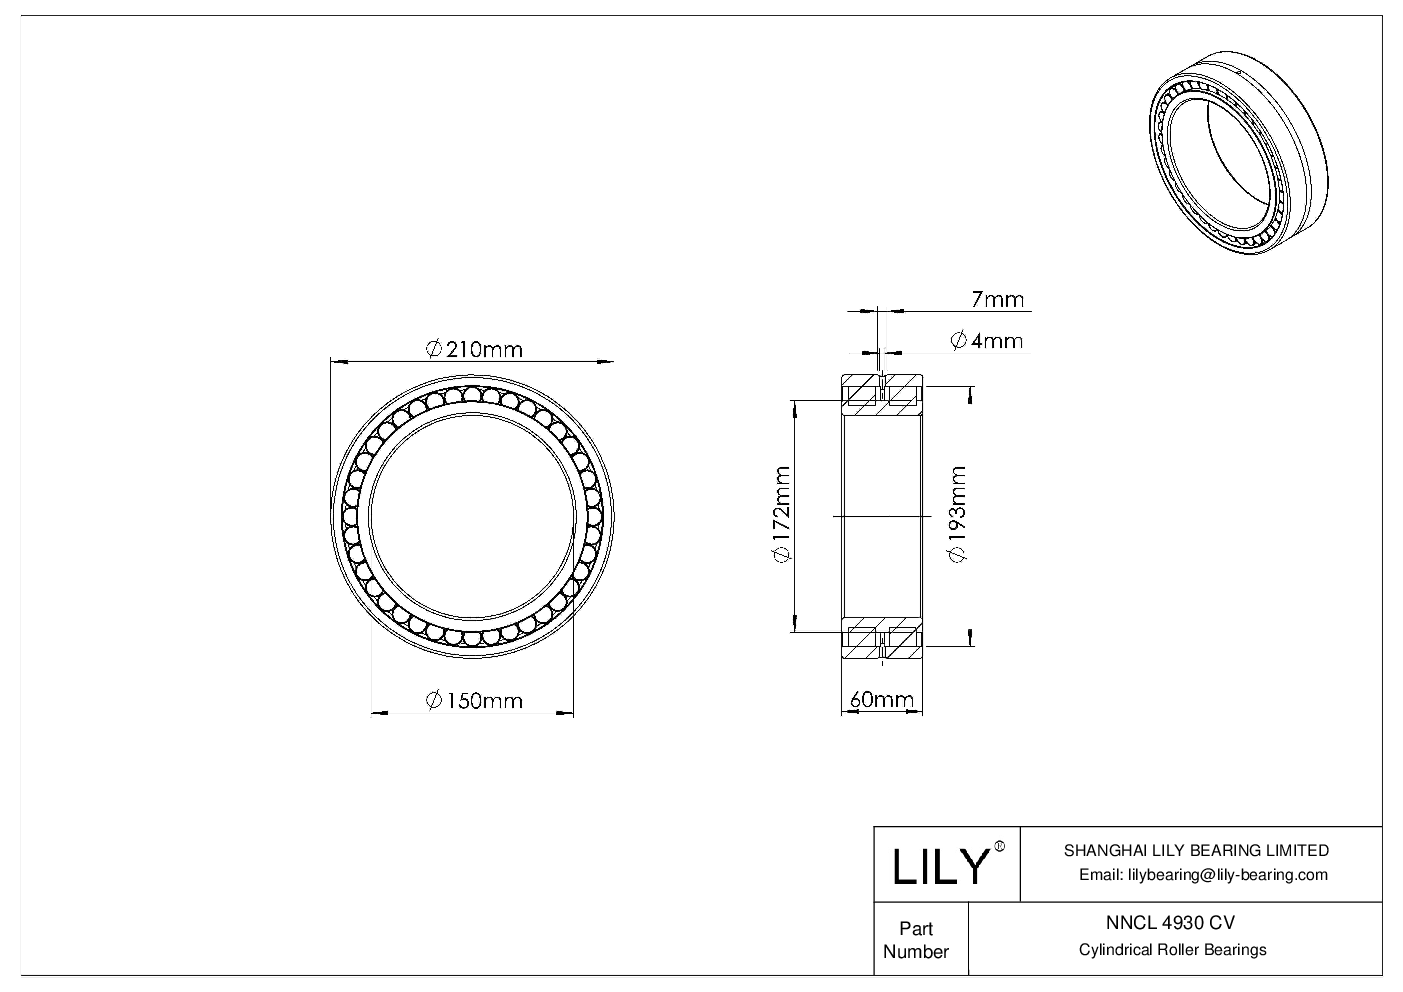 NNCL 4930 CV Double Row Full Complement Cylindrical Roller Bearings cad drawing